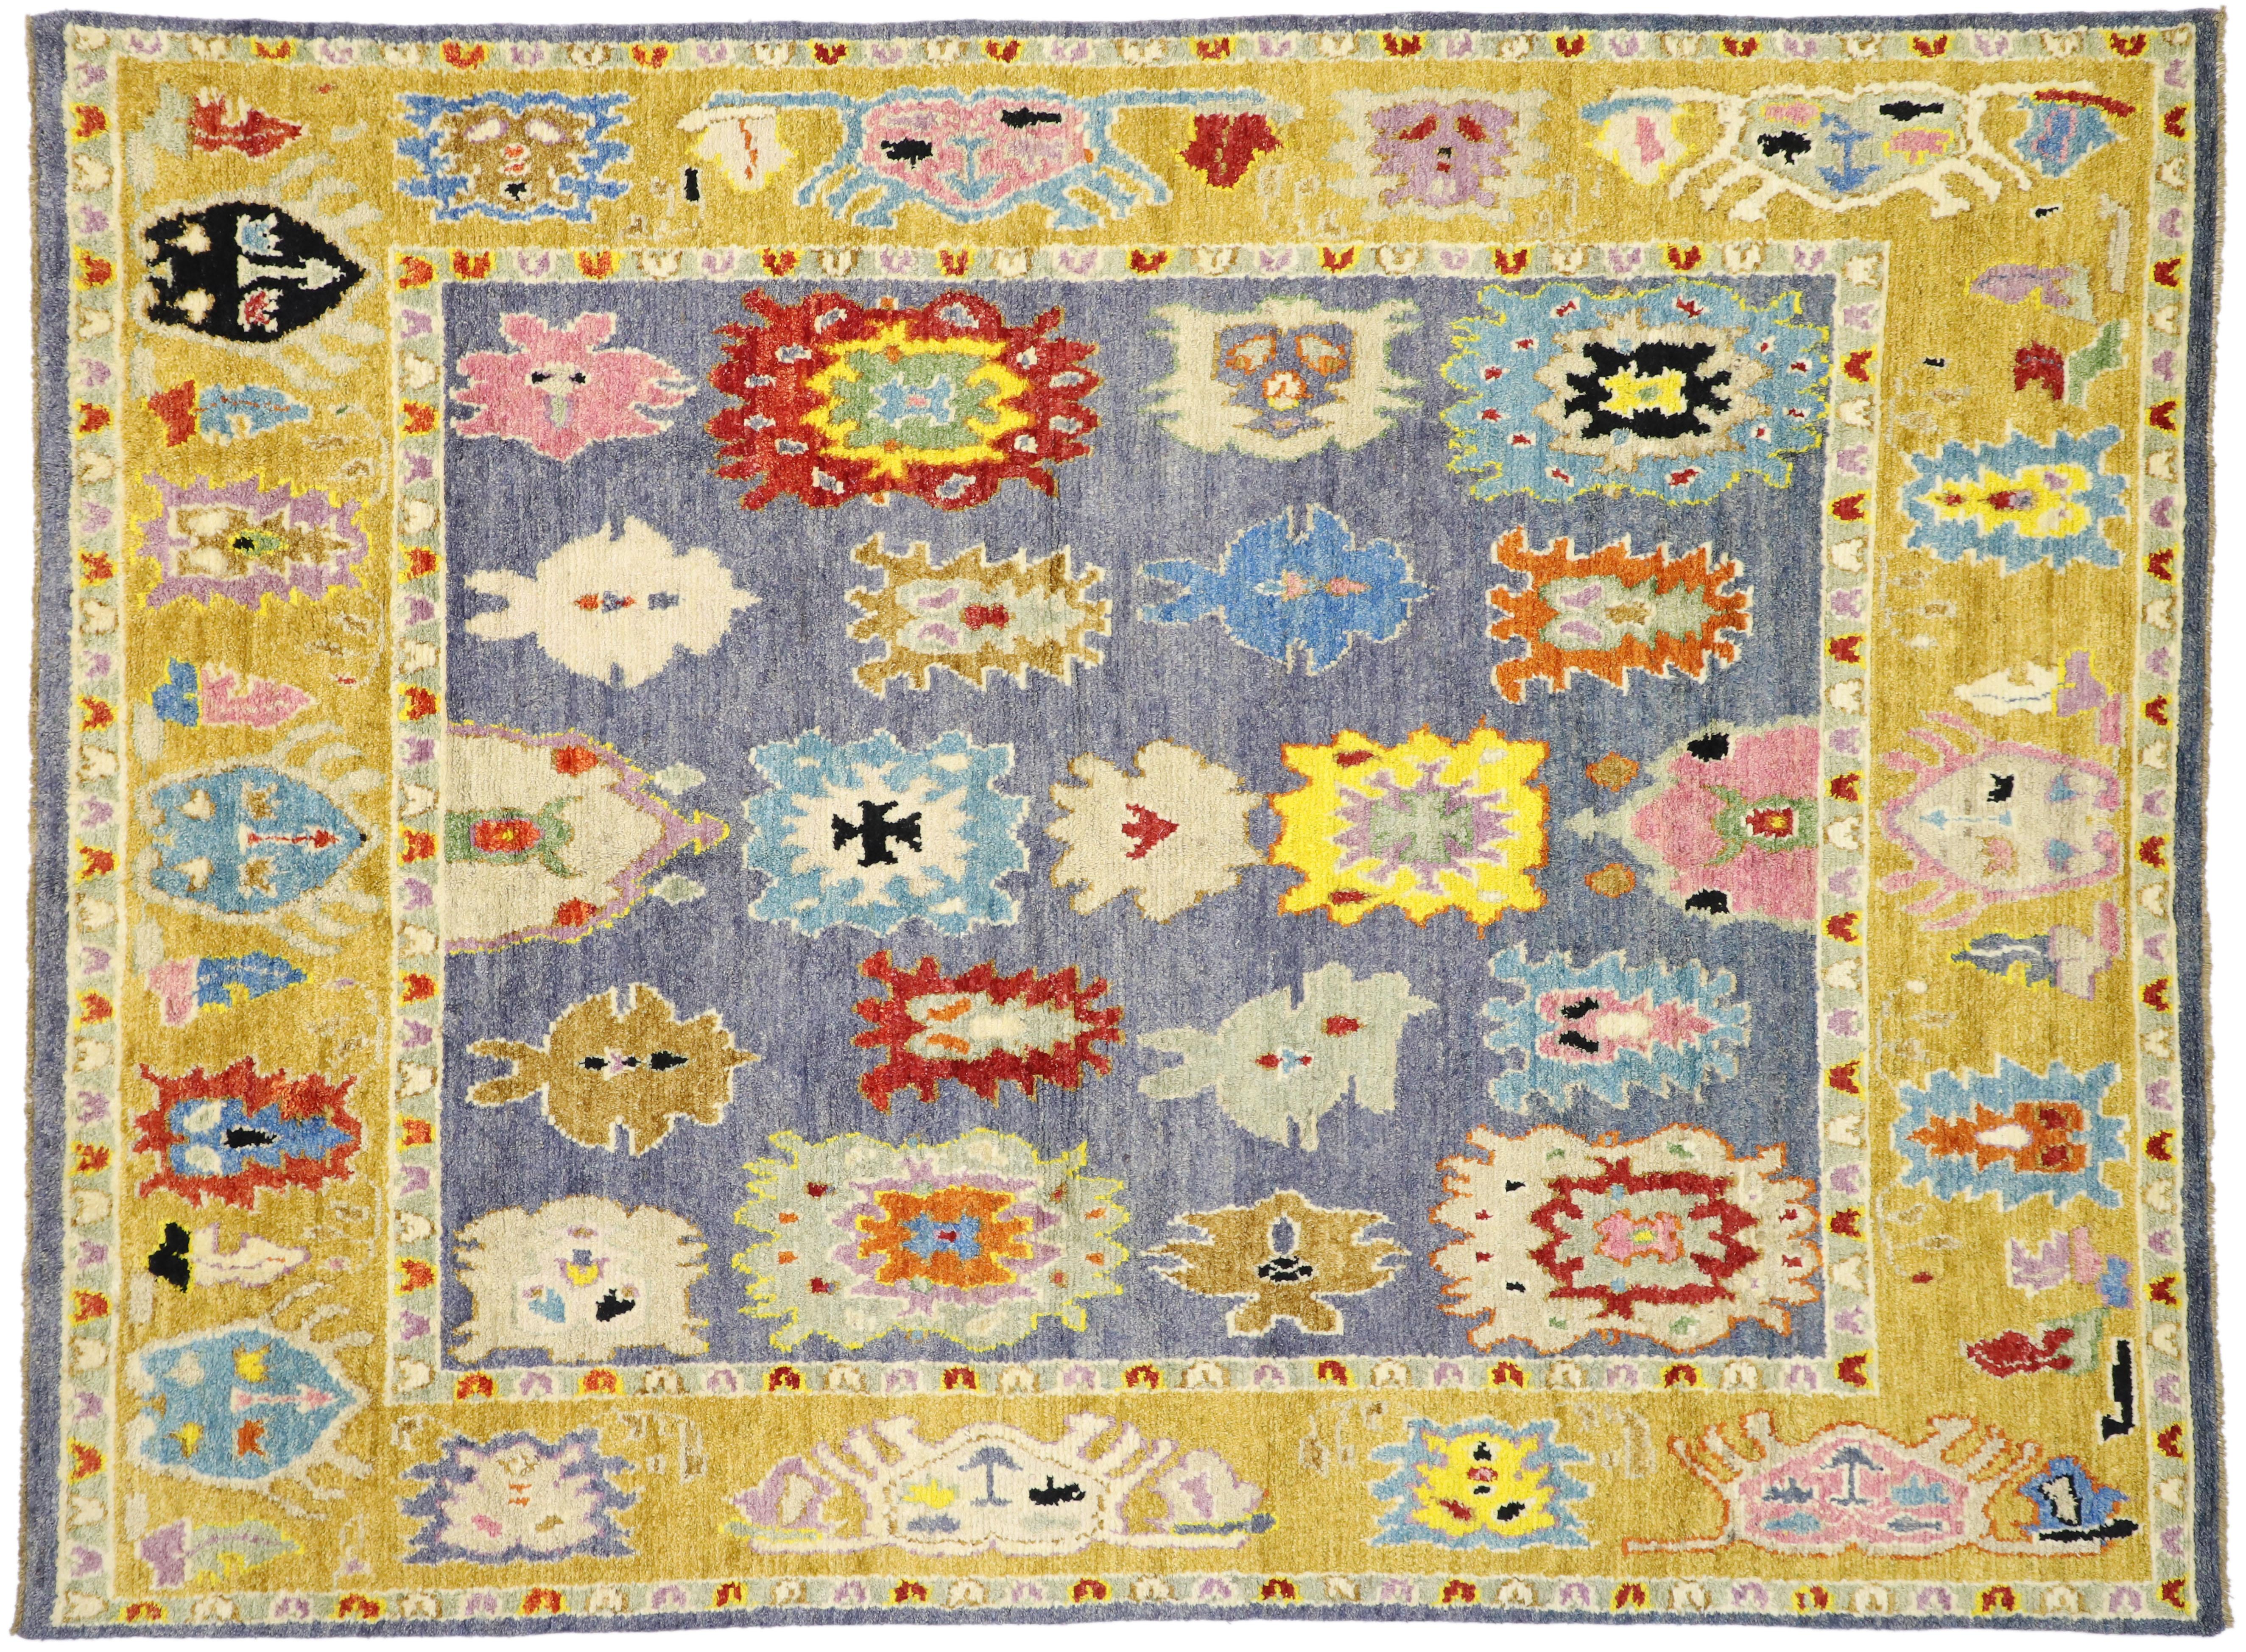 Contemporary Moroccan Area Rug with Oushak Design Pattern and Memphis Style 3